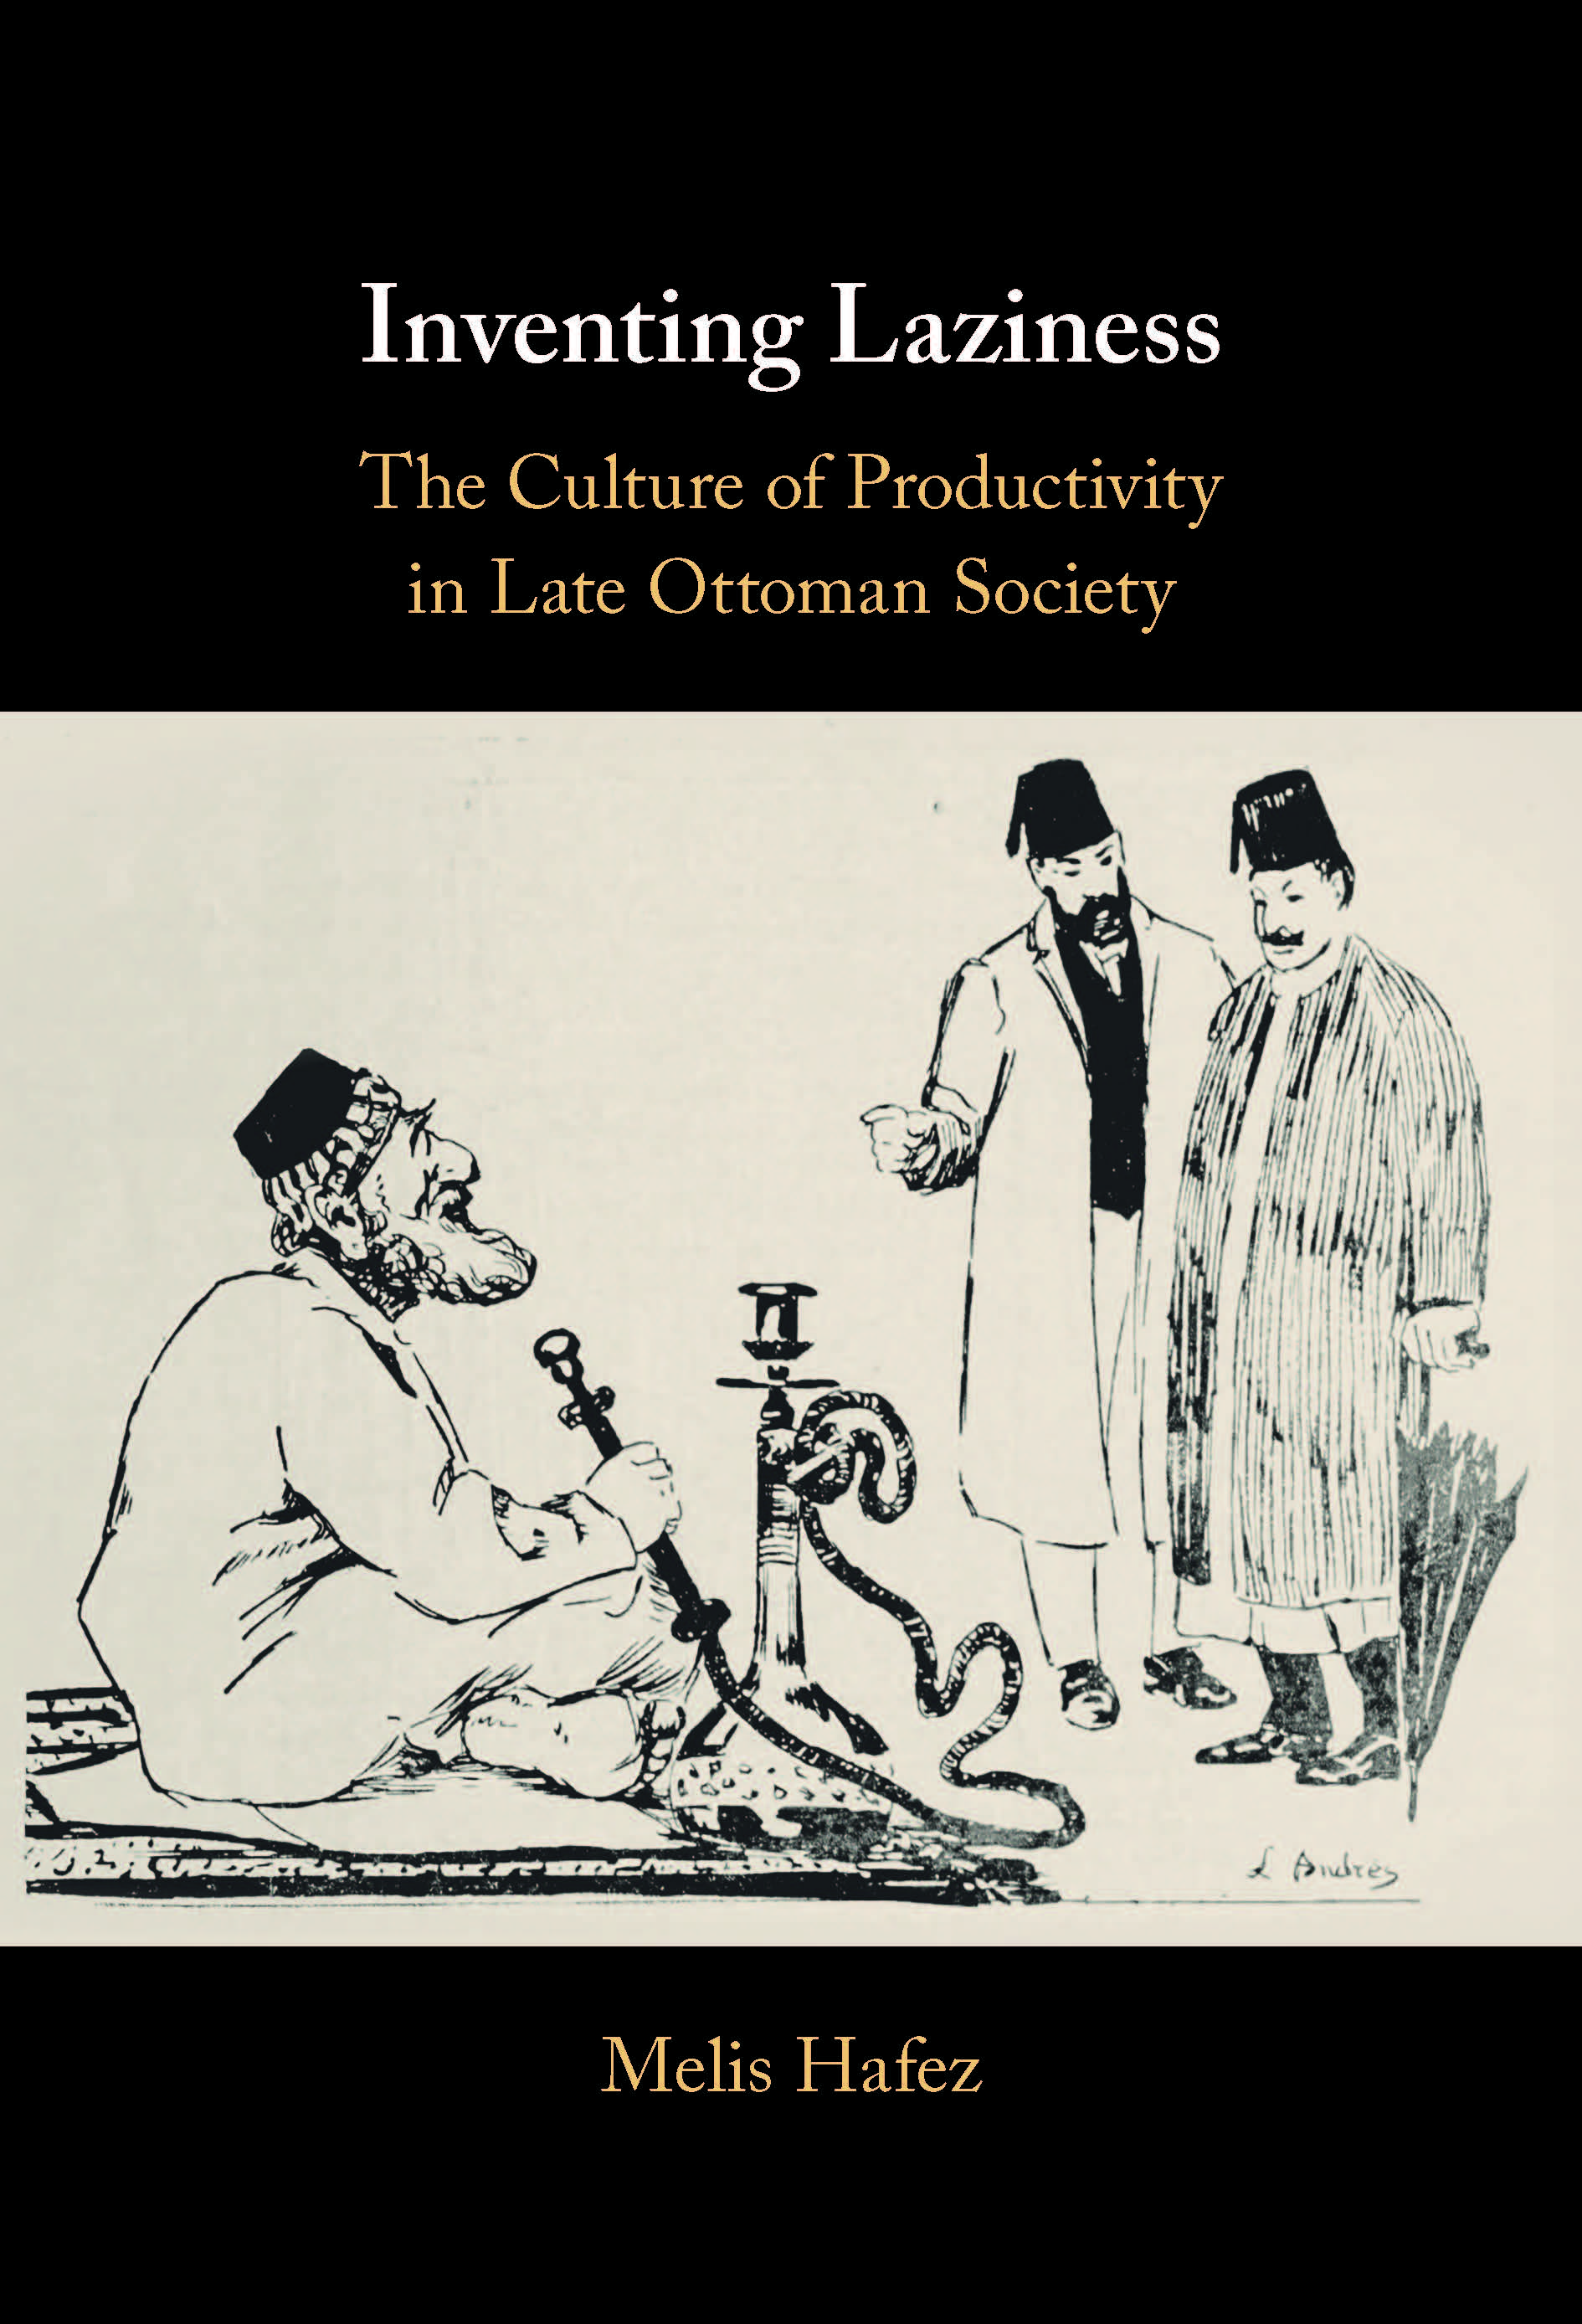 book cover depicting drawing of historic ottomans - one seated in the foreground, and two standing in background